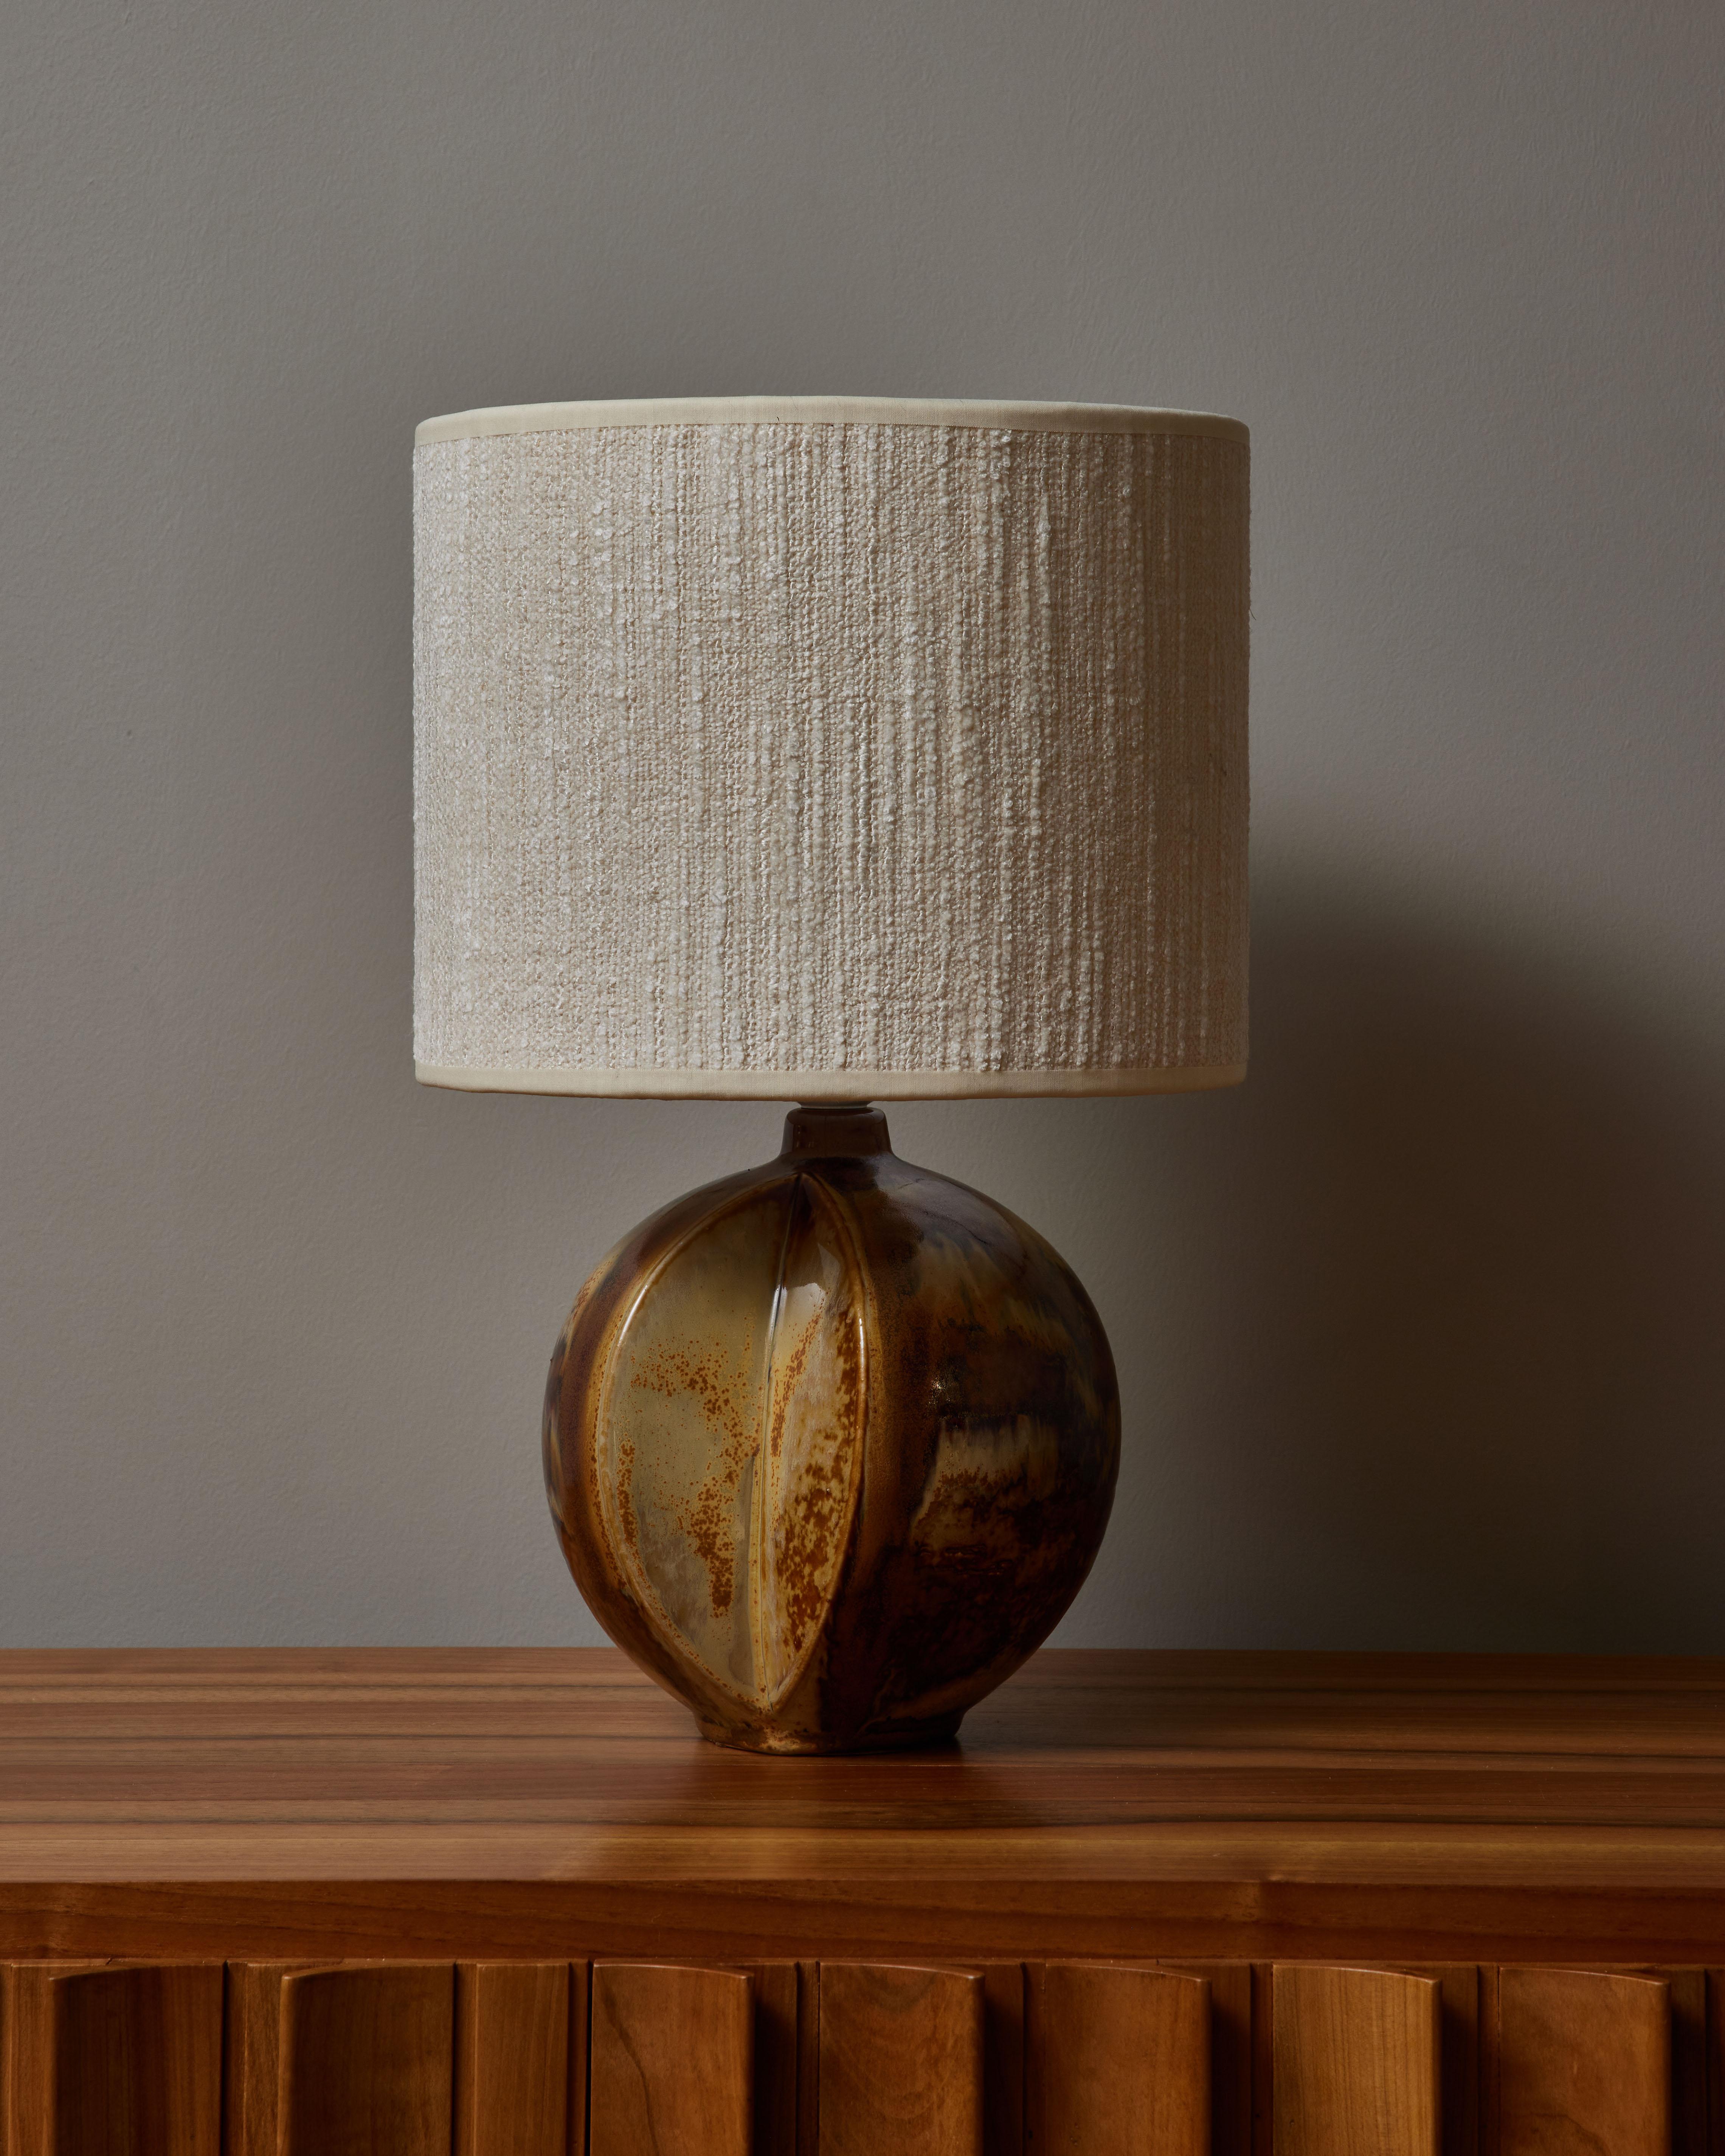 Small table lamp made of glazed ceramic by the Danish makers of Søholm Stentøj. New lampshade with DEDAR fabric.
The origin of Søholm Stentøj (Soholm’s sandstone) dates back to the first half of the 17th century and the Danish island of Bornholm,